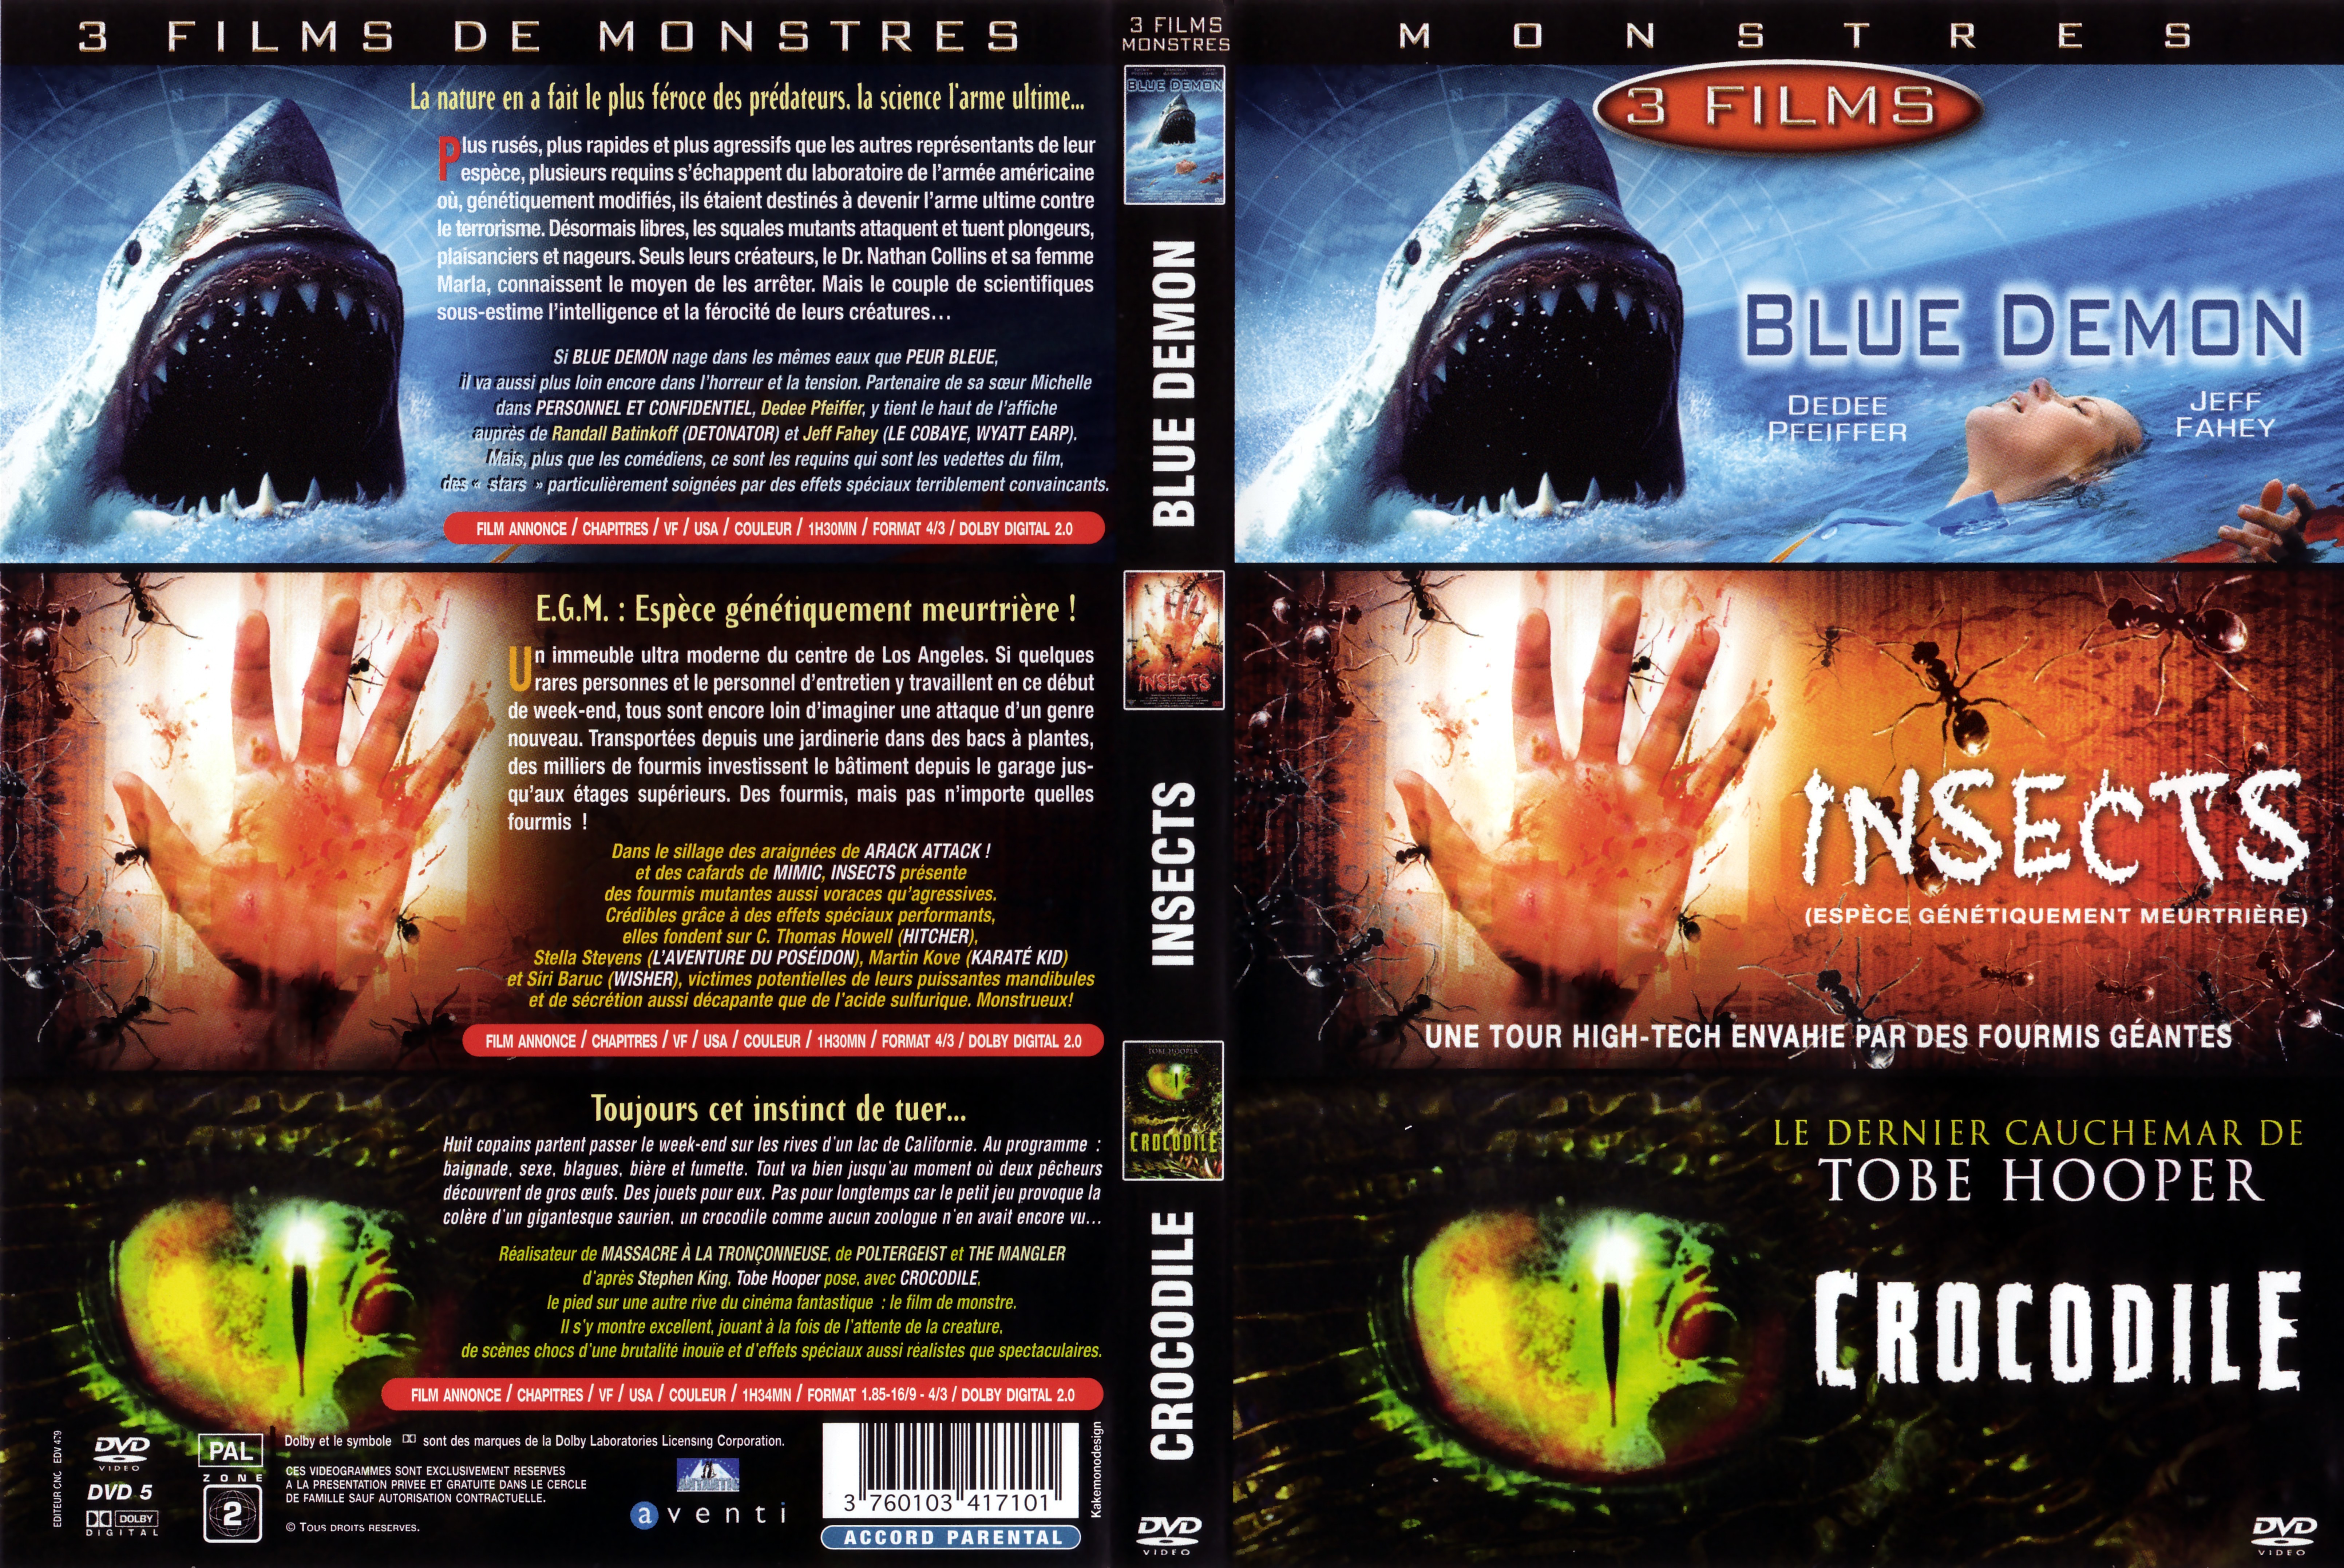 Jaquette DVD Blue demon + Insects + Crocodile